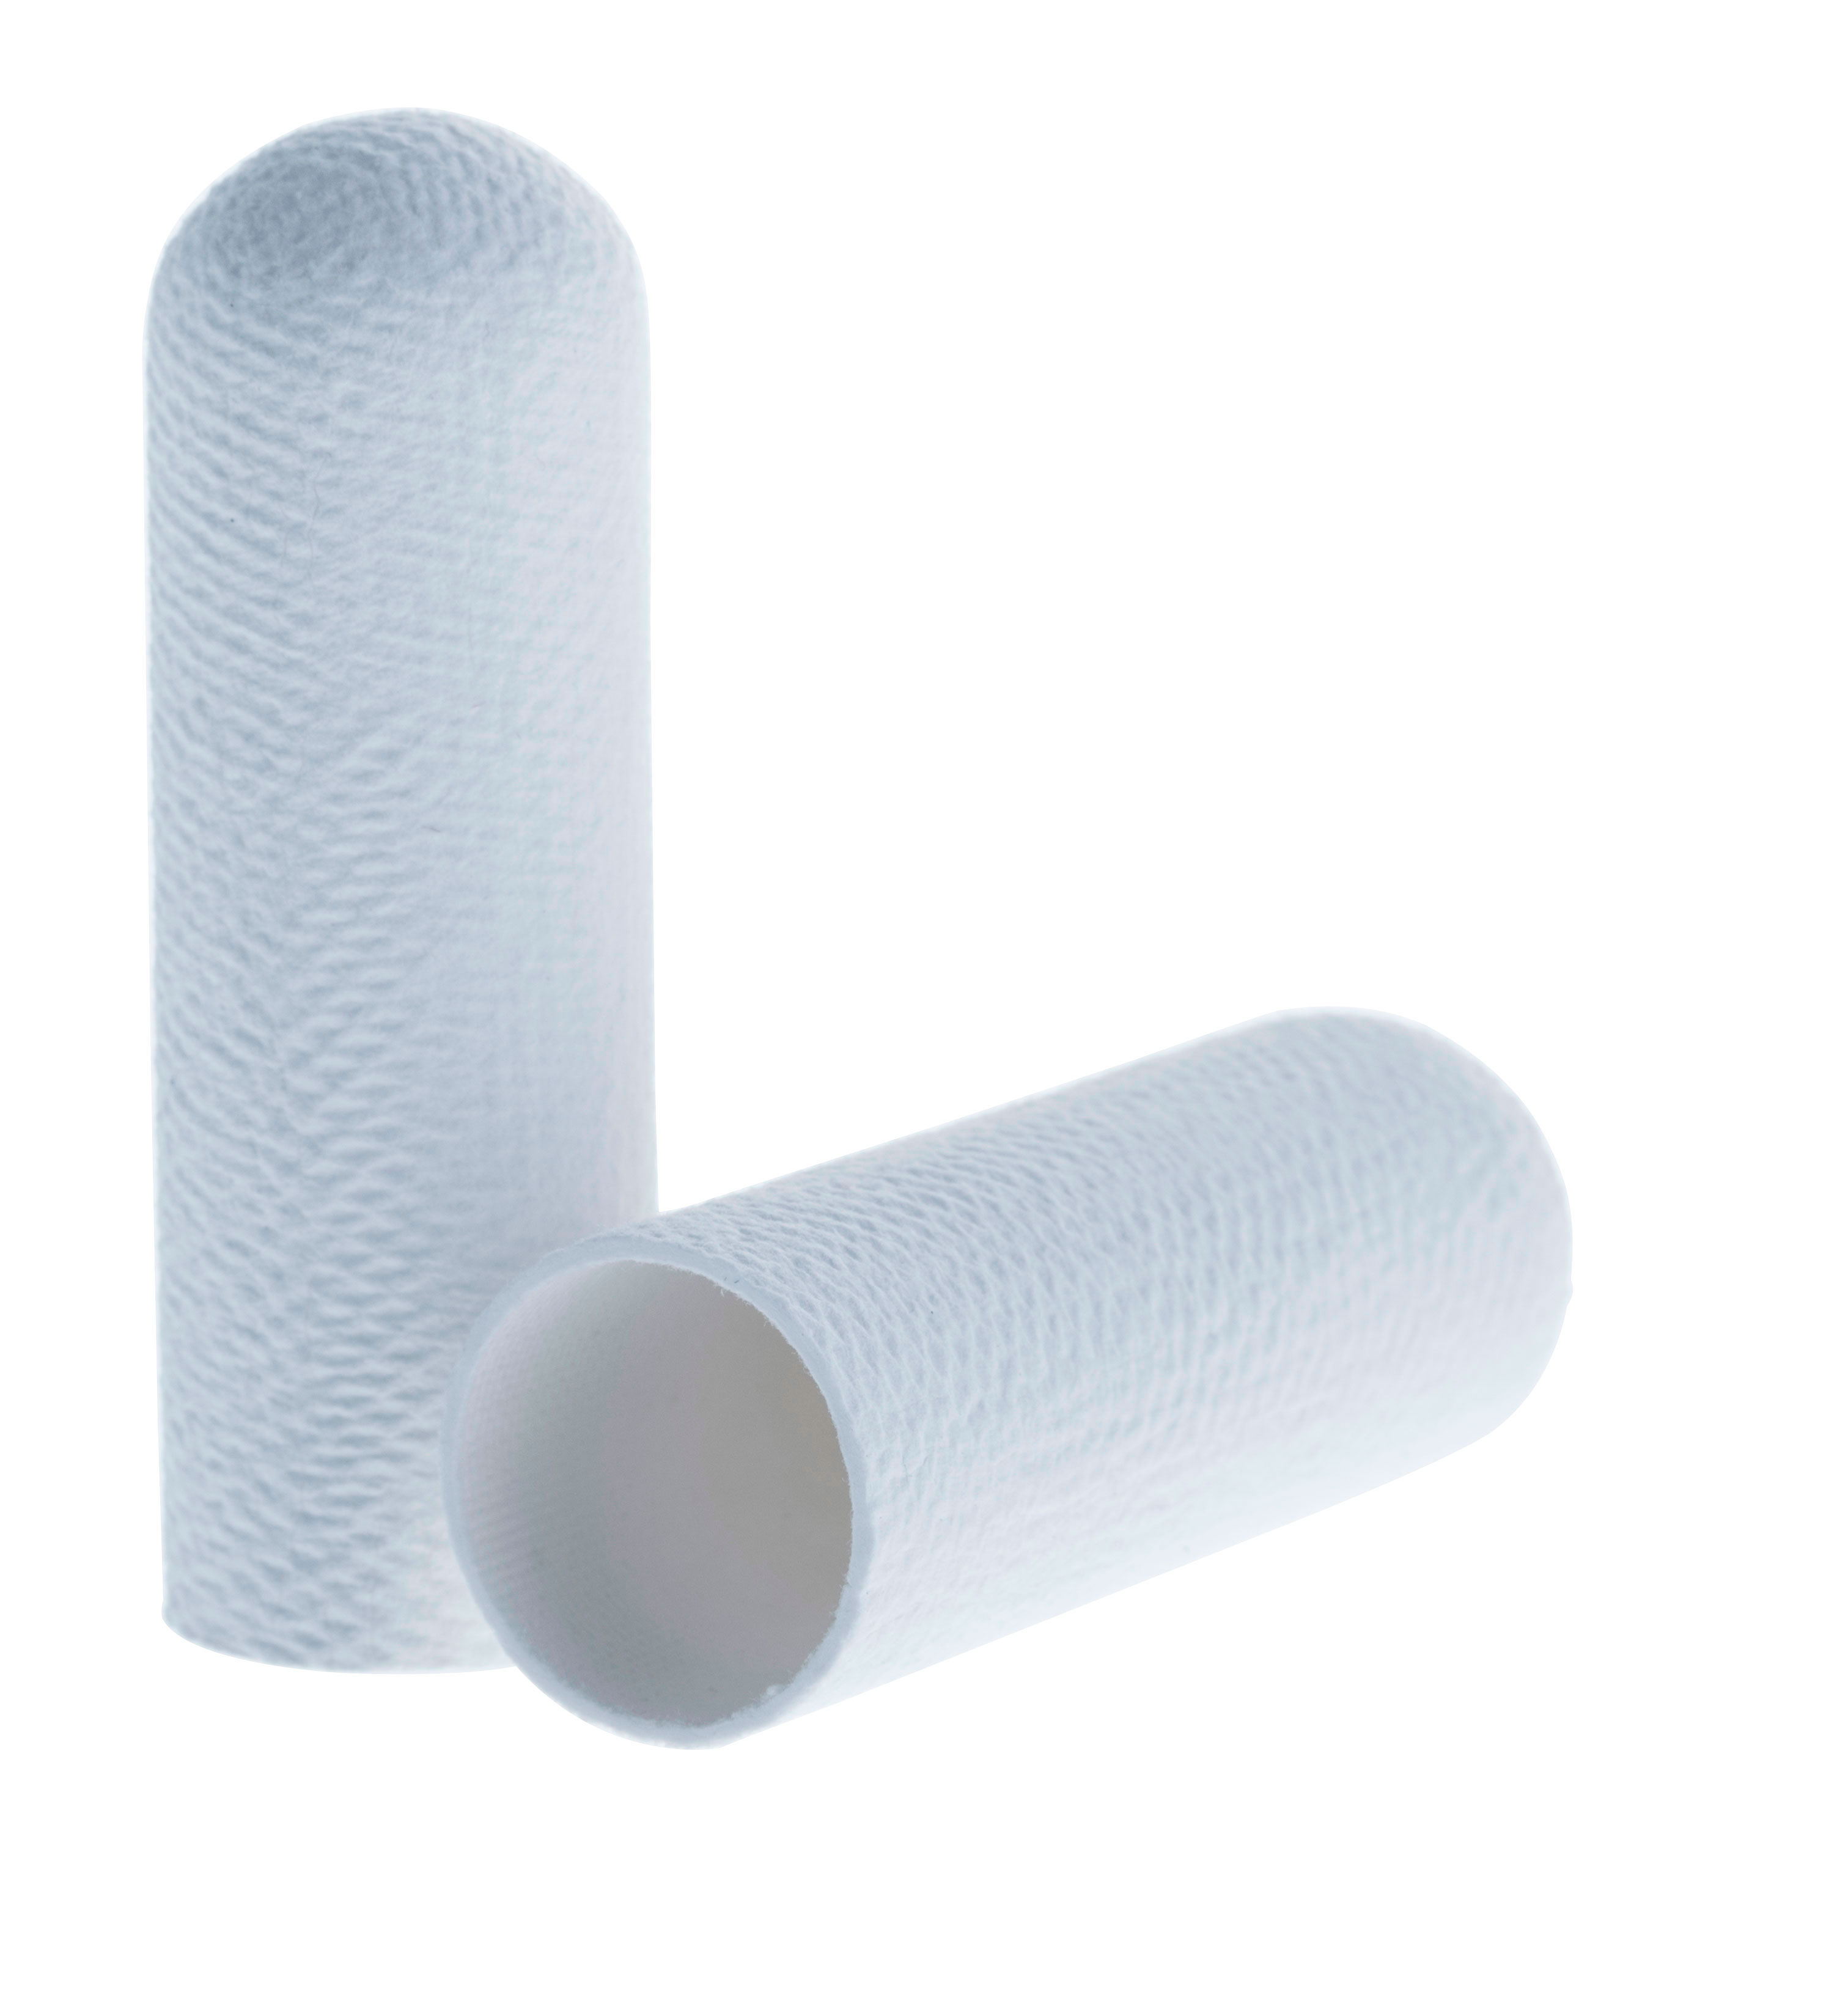 Cellulose extraction thimbles for Soxhlet extraction. SCHARLAU. Standard cellulose cartridge. Dim. Øxlength: 20x80mm. Particle retention in liquid: Nom. 8-15 microns